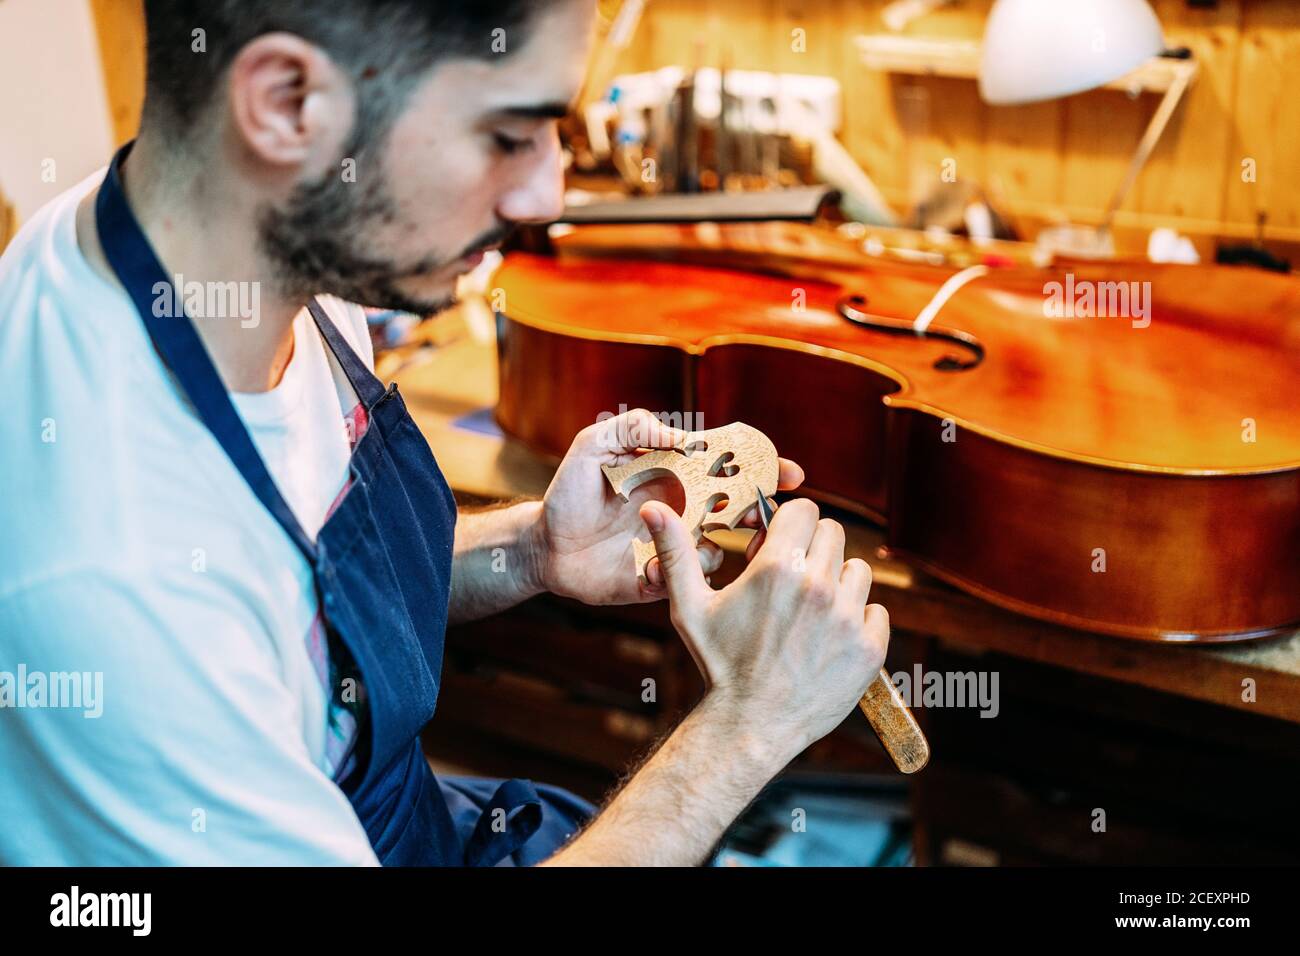 Side view of skilled young male artisan with knife carving wooden violin bridge while creating string instrument in workshop Stock Photo